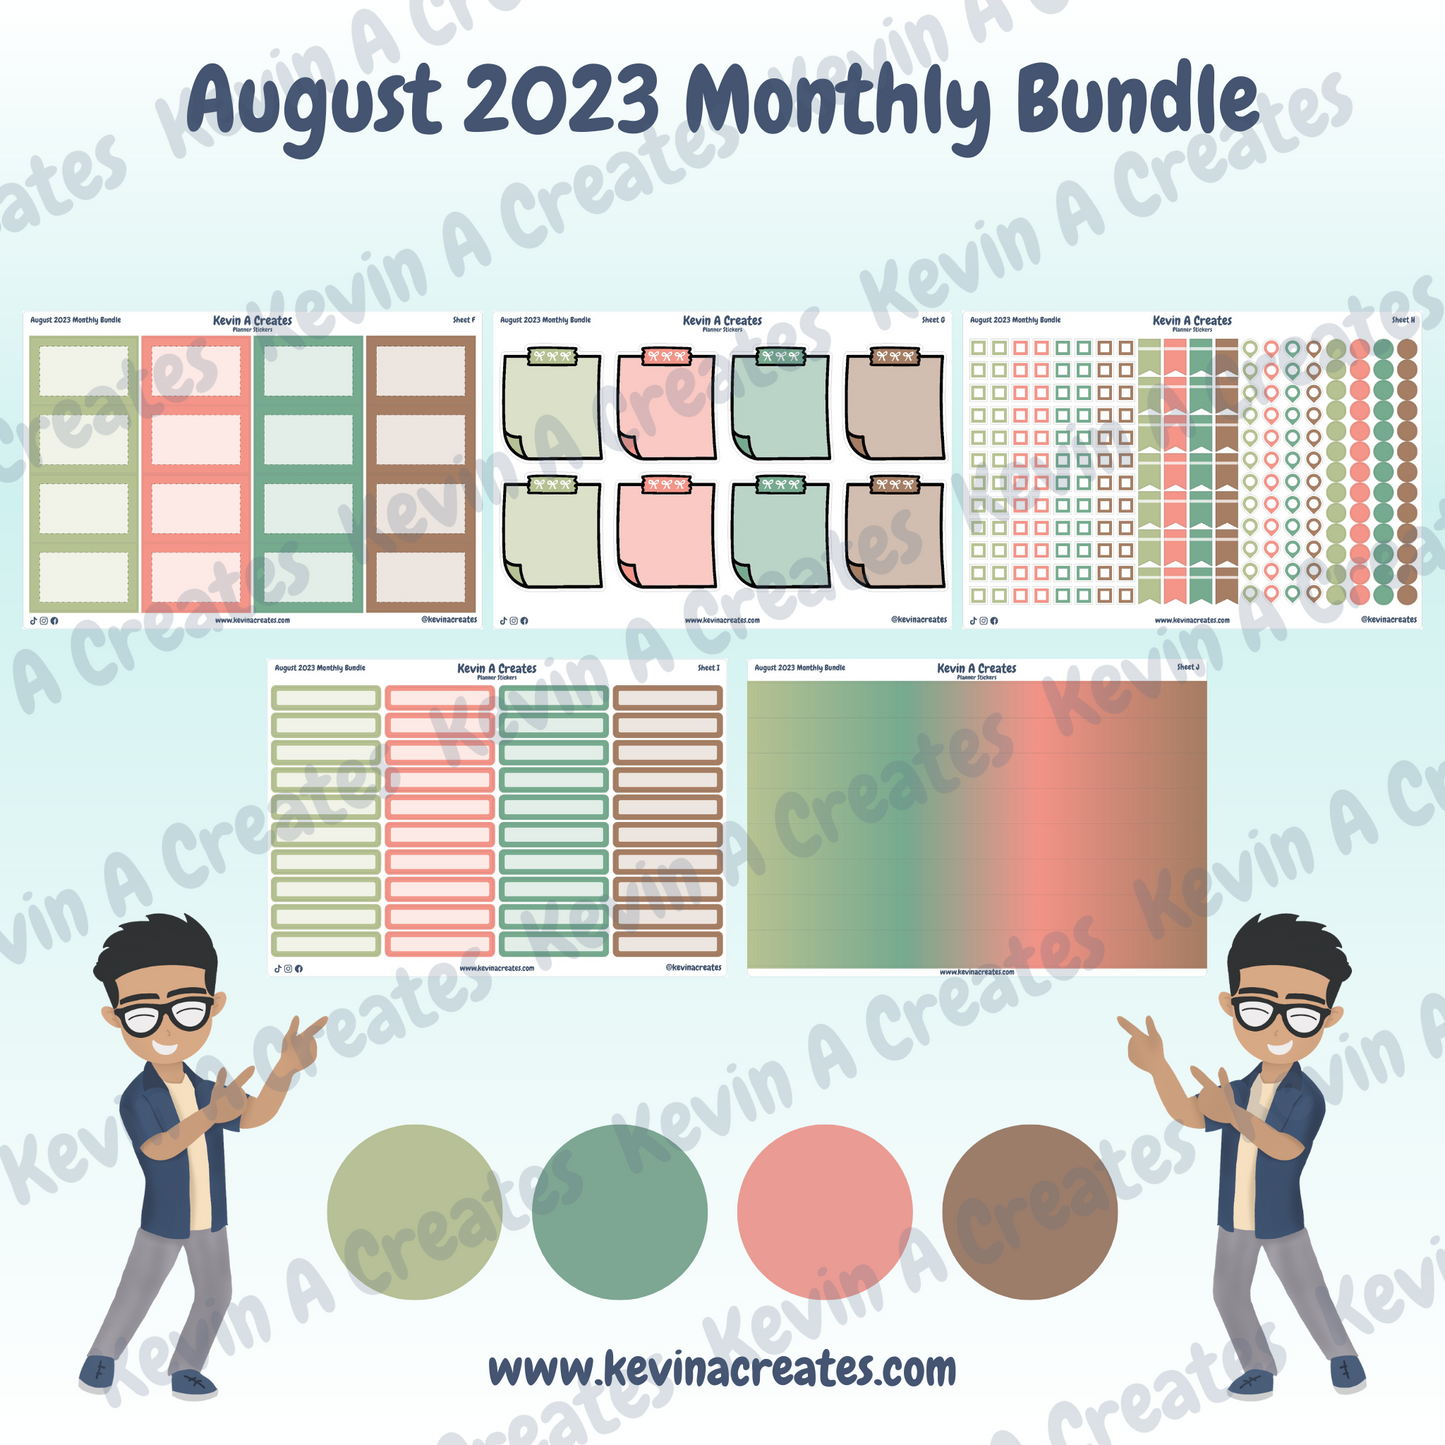 August 2023 Monthly Bundle Kit, Planner Stickers, Functional Planner Stickers